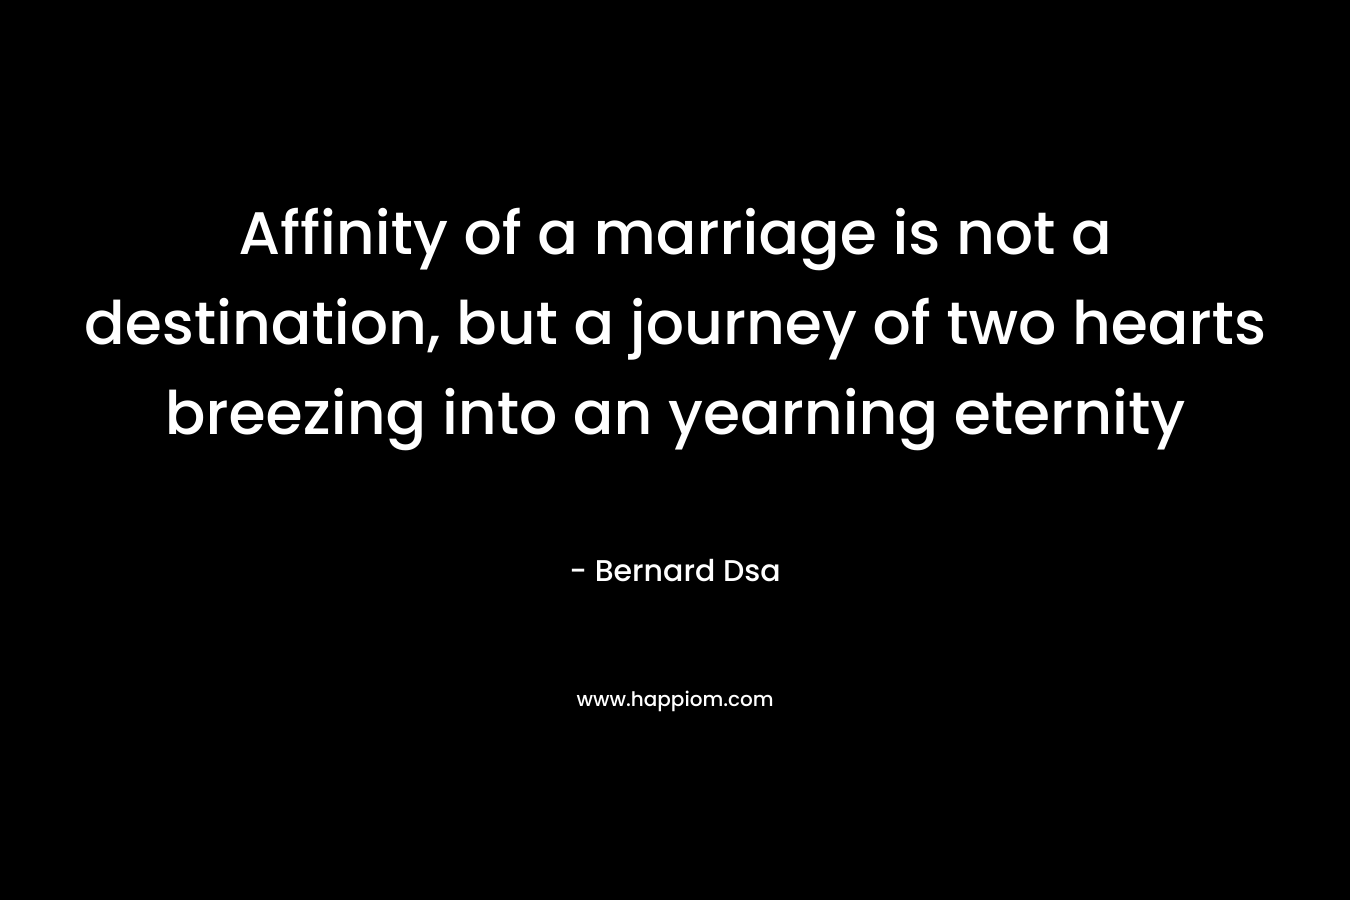 Affinity of a marriage is not a destination, but a journey of two hearts breezing into an yearning eternity